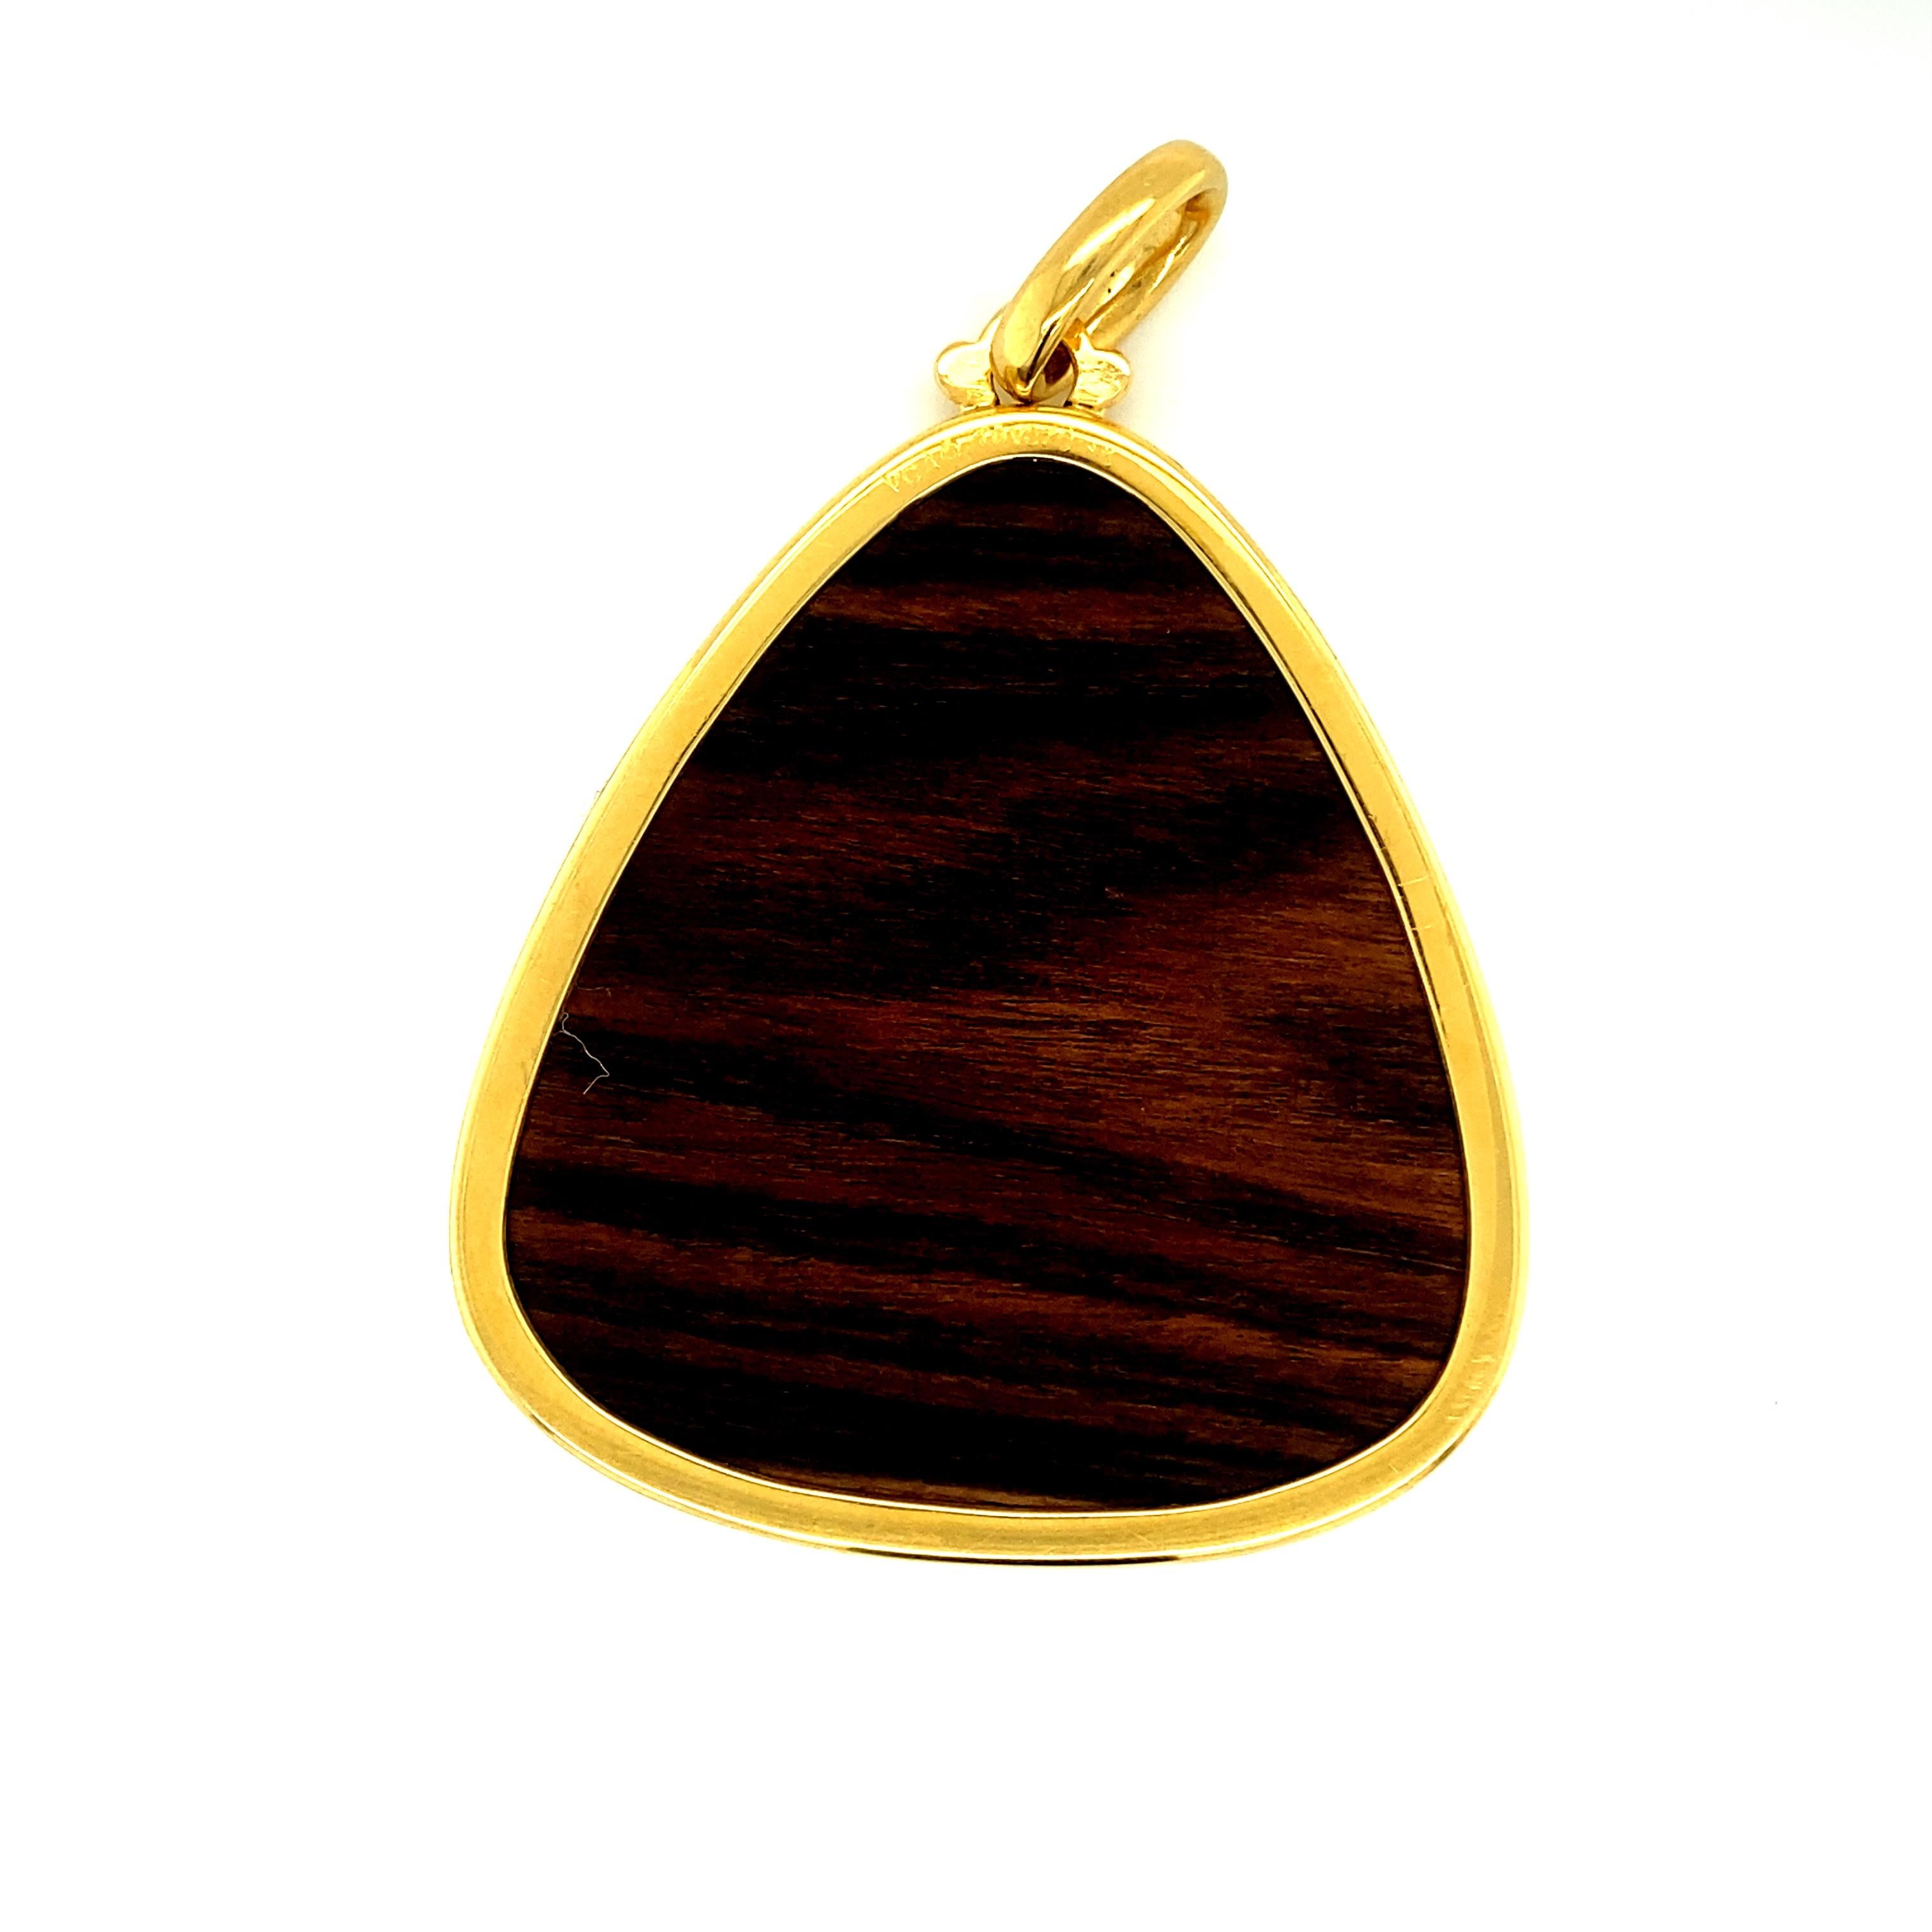 Contemporary Van Cleef & Arpels Large Pendant Tigers Eye in 18k Yellow Gold